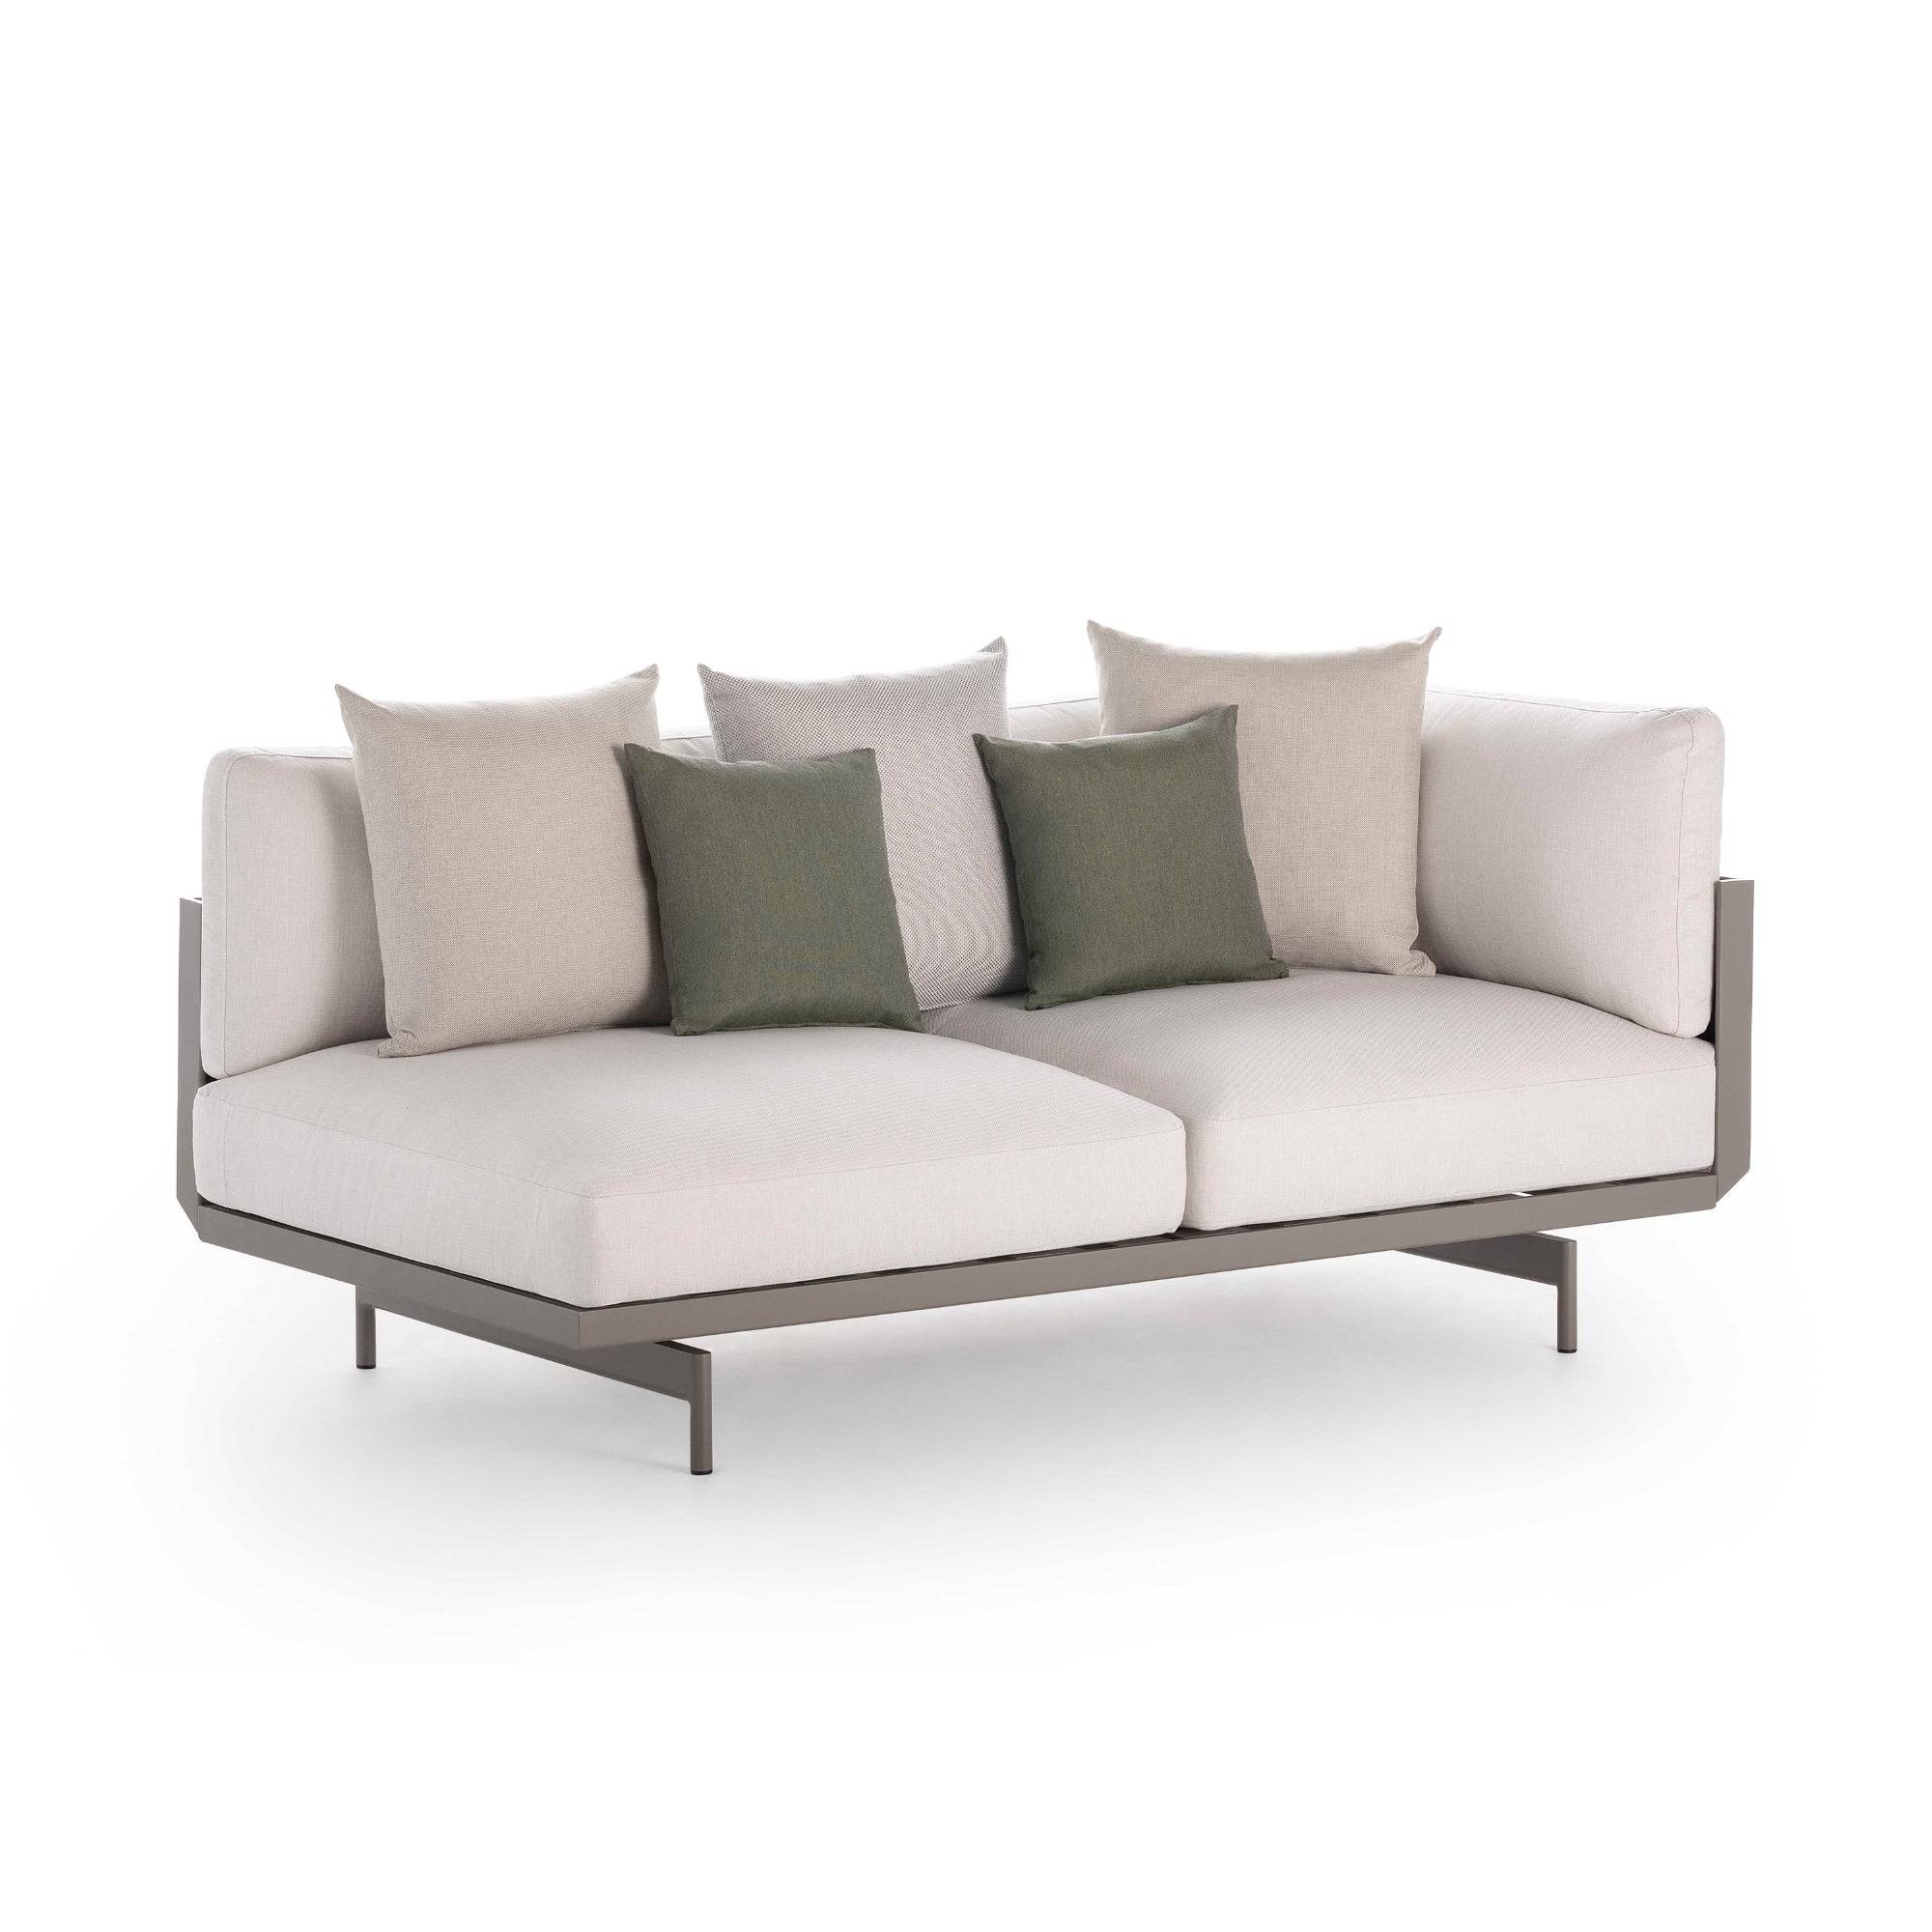 Onde Sectional 1 - THAT COOL LIVING